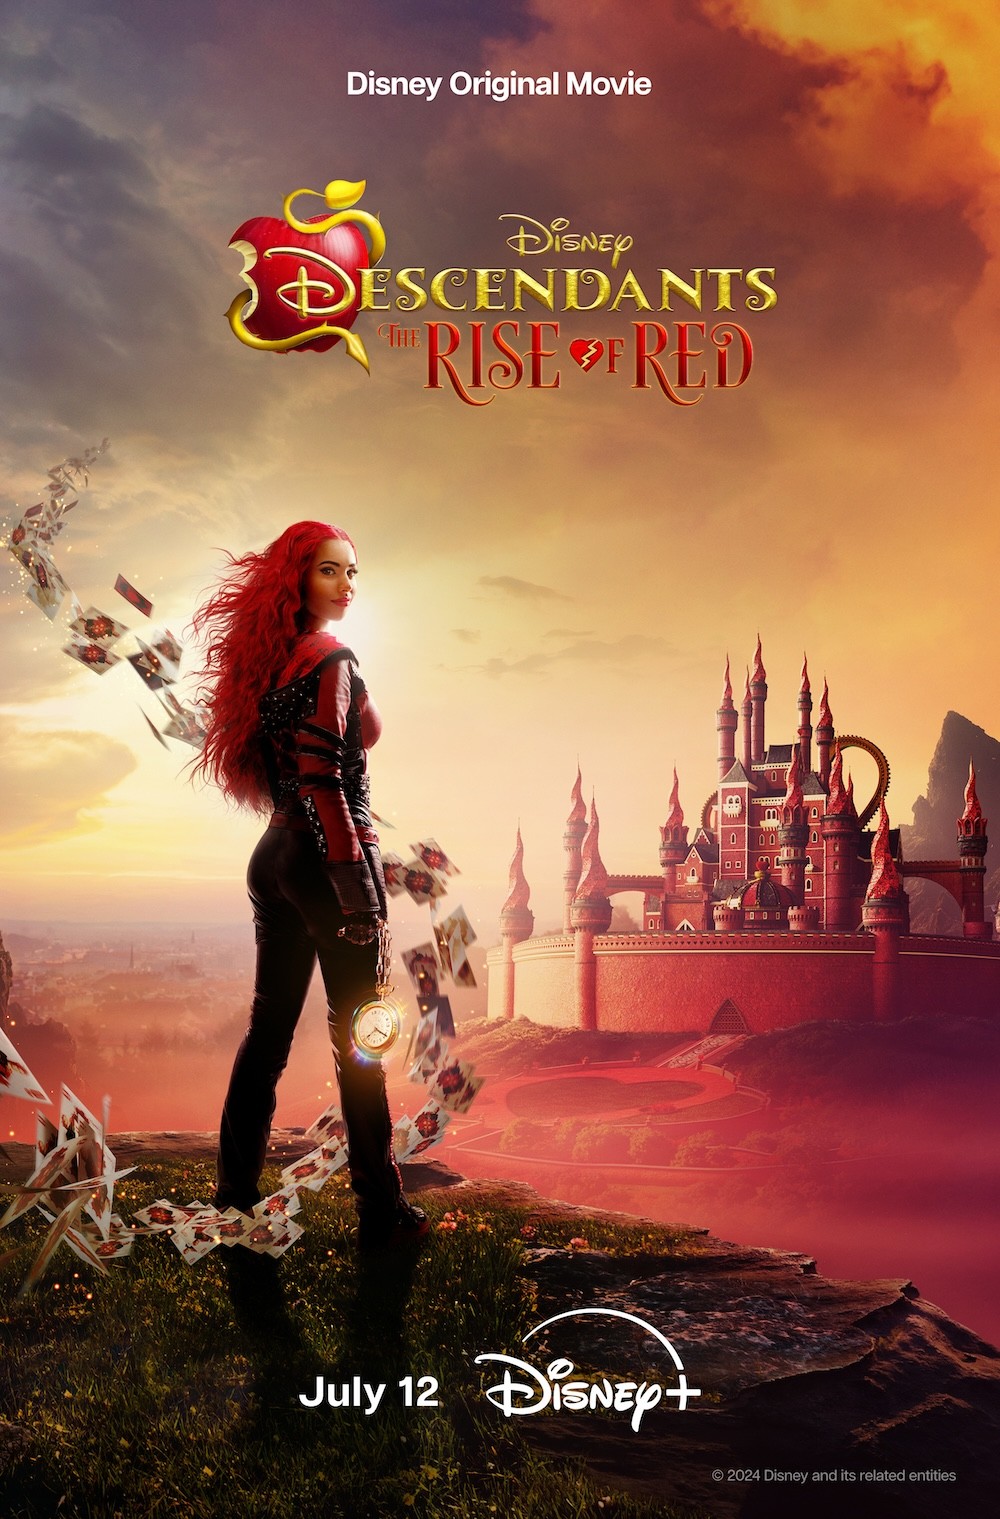 <p>'90s kids, rejoice — Brandy's back! After starring in <em><strong><a href="https://www.brit.co/best-christmas-ever/">Best. Christmas. Ever!</a></strong></em>, the singer and actress is reprising her iconic role as Cinderella in this new <em>Descendants</em> installment. Uma is now headmaster of Auradon Prep, and when she invites the Queen of Heart's daughter Red to join her, the Queen uses it as an opportunity to get revenge on Cinderella.</p><p><em>Descendants: Rise of Red hits Disney+ July 12 and stars Brandy, Rita Ora, Kylie Cantrall, Malia Baker, China Anne McClain, Jeremy Swift, Dara Reneé, Ruby Rose Turner.</em></p>